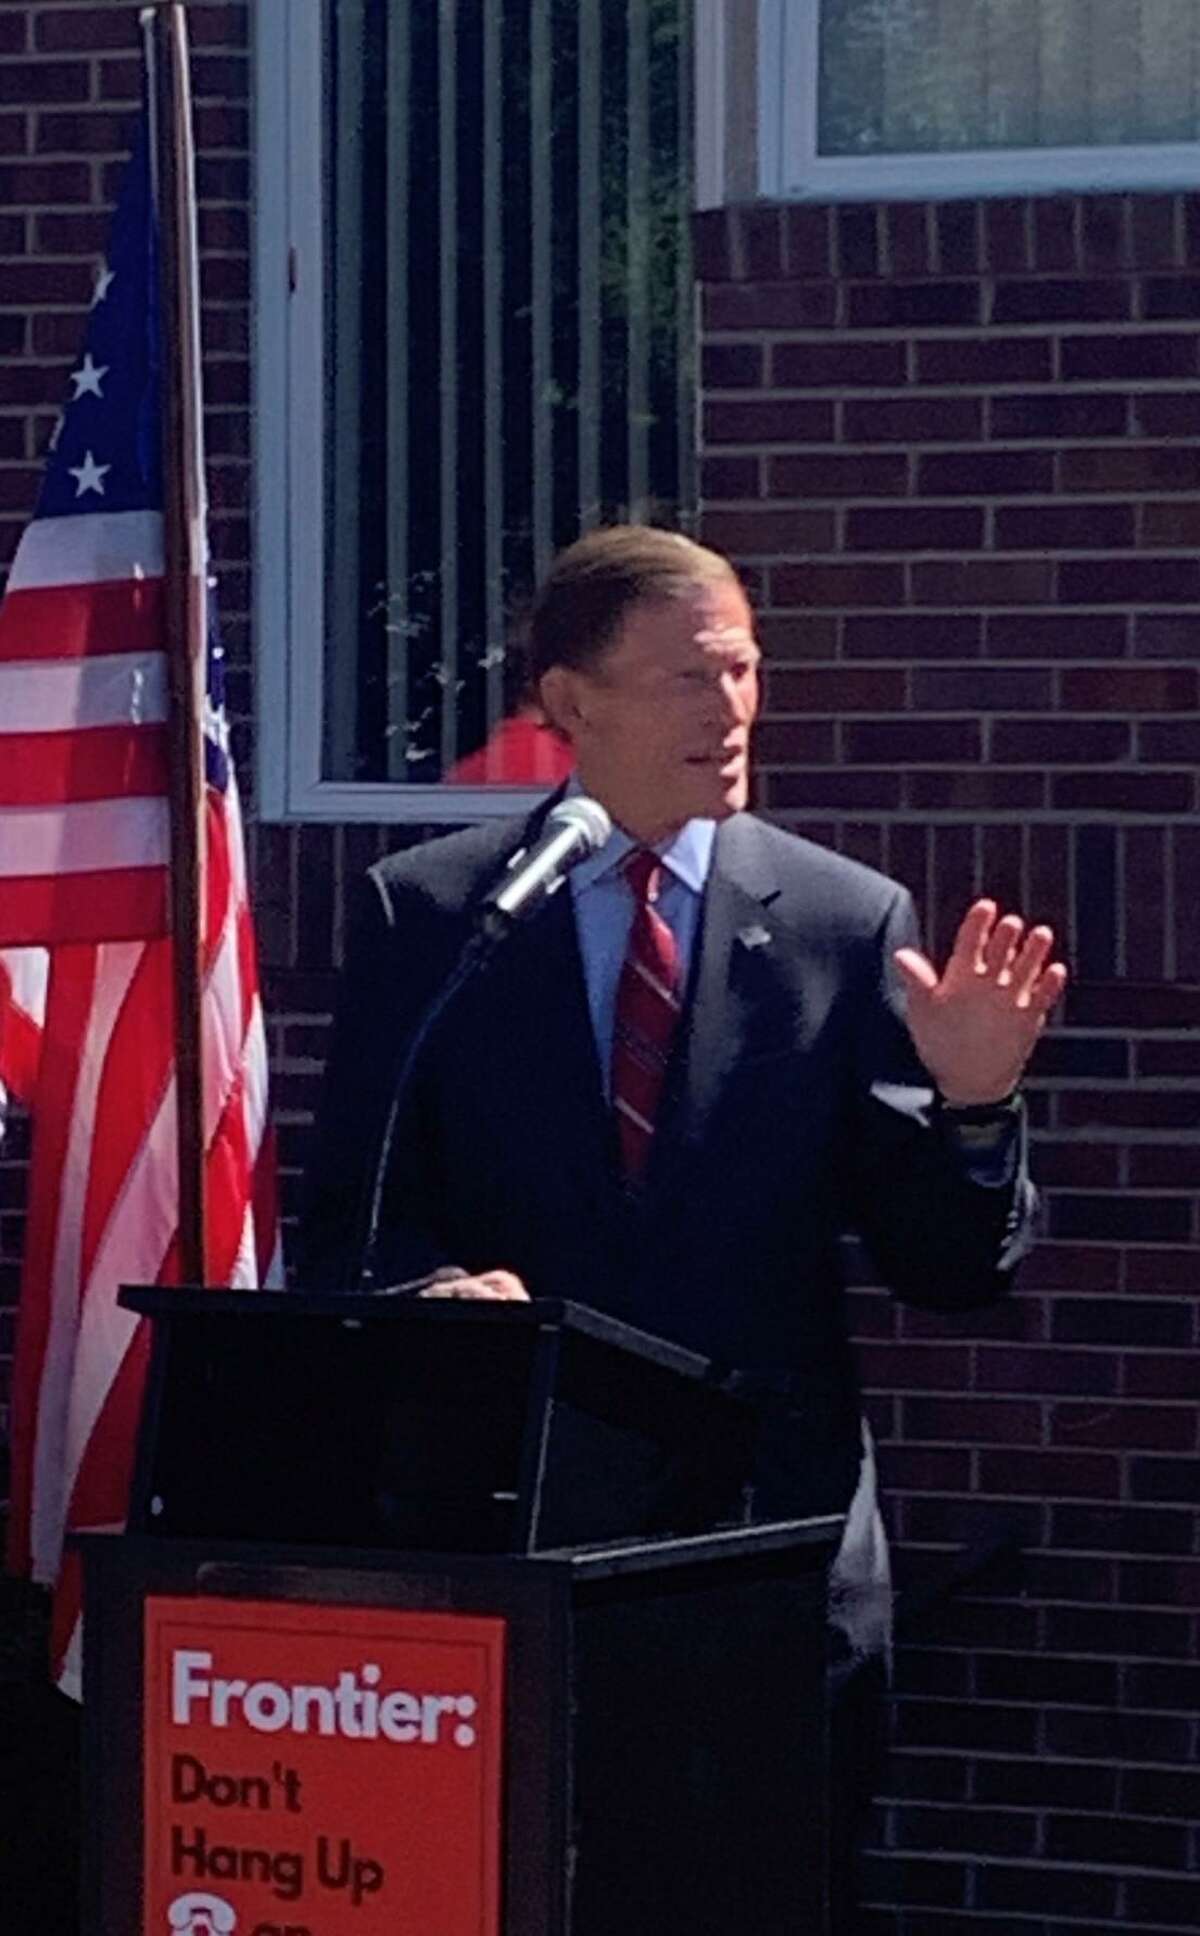 U.S. Senator Richard Blumenthal address members of Local 1298 of the Communications Workers of America Thursday during a press conference in Hamden.